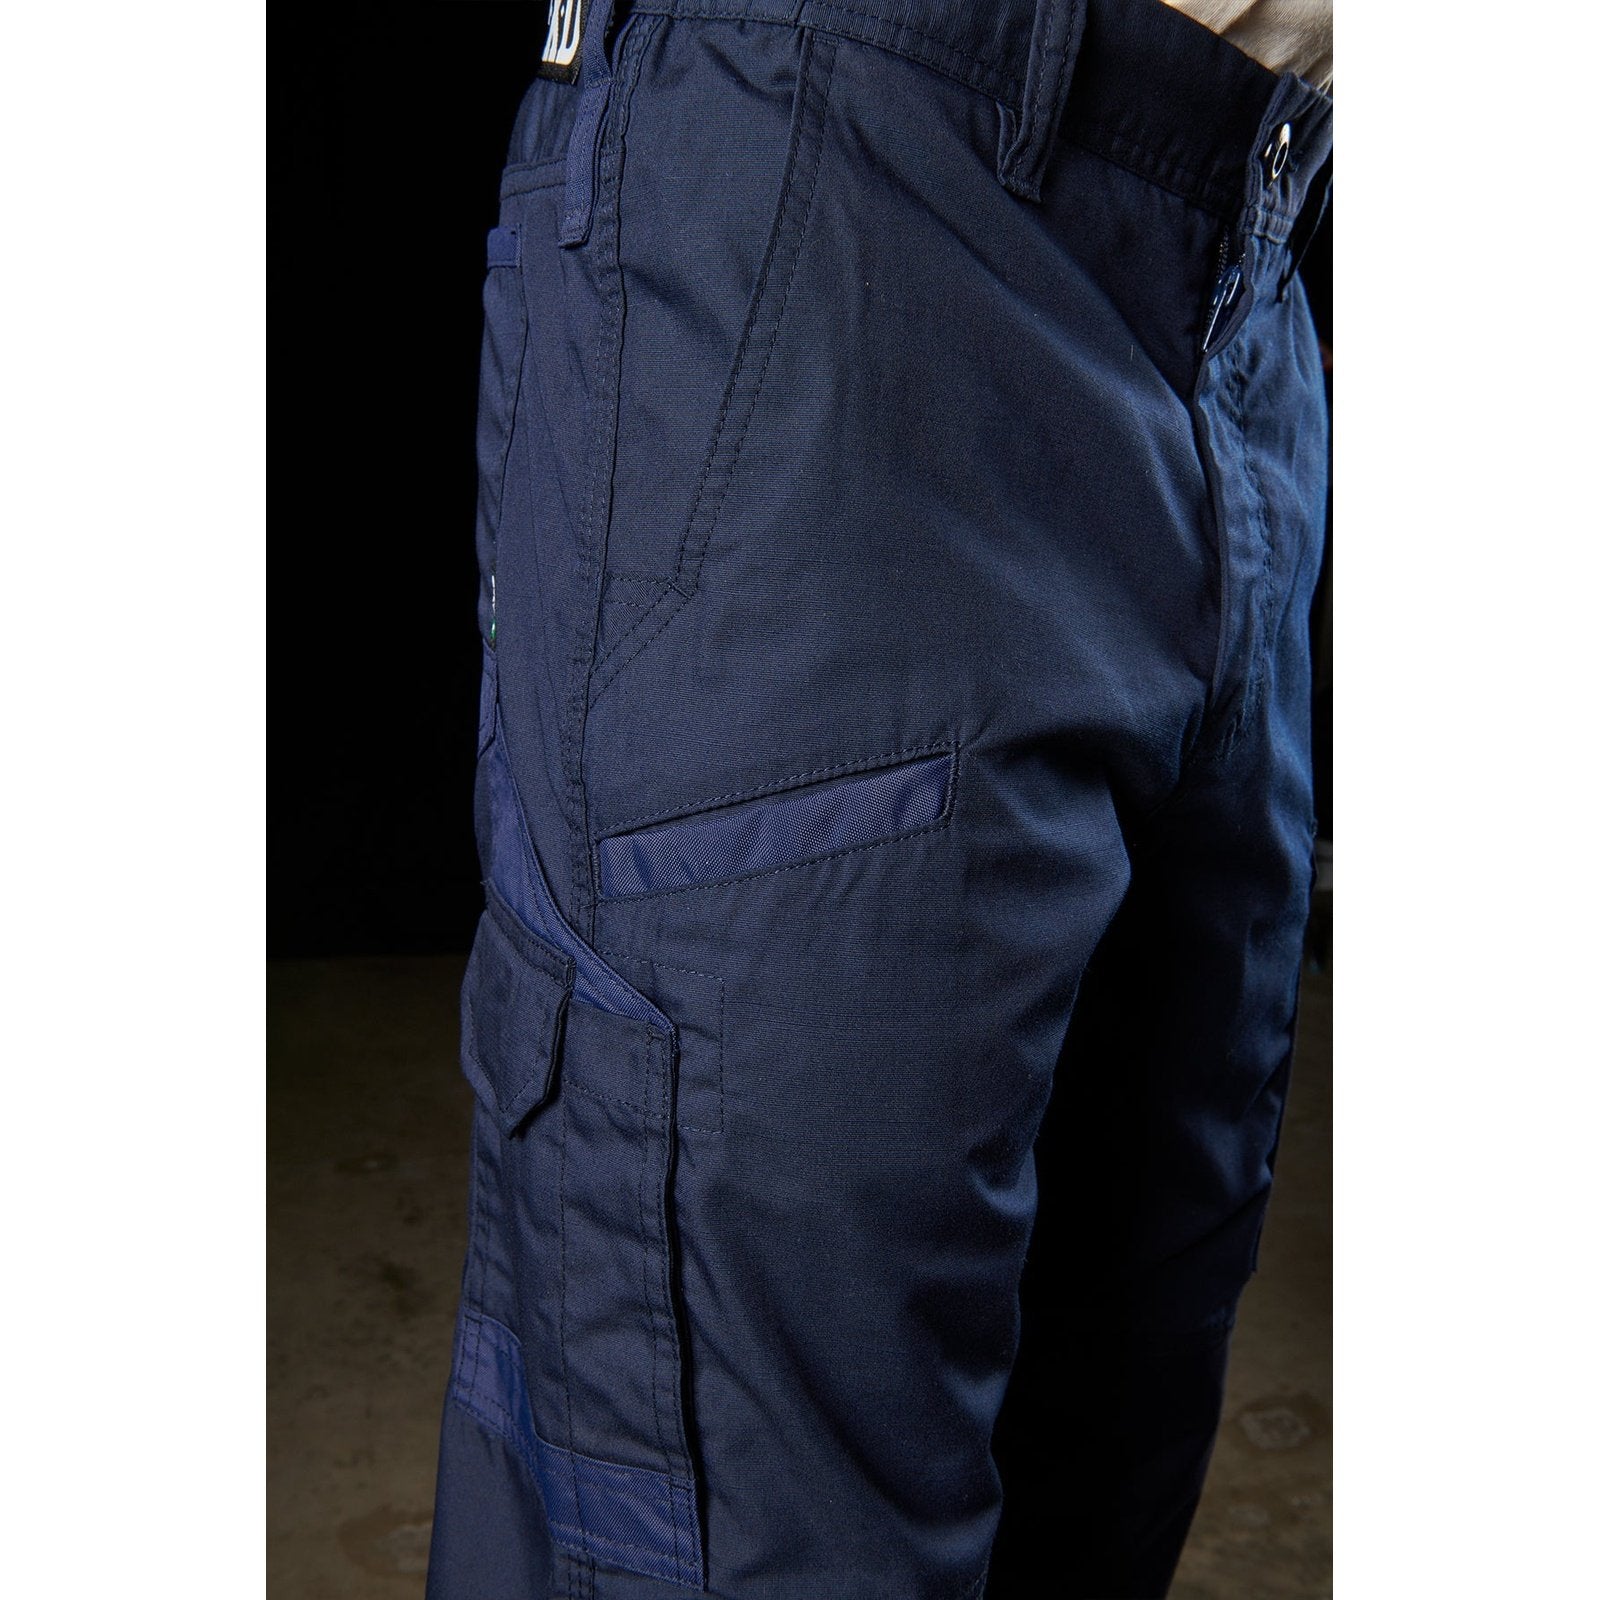 FXD WP5 COOLMAX - FXD Work Pant Adelaide